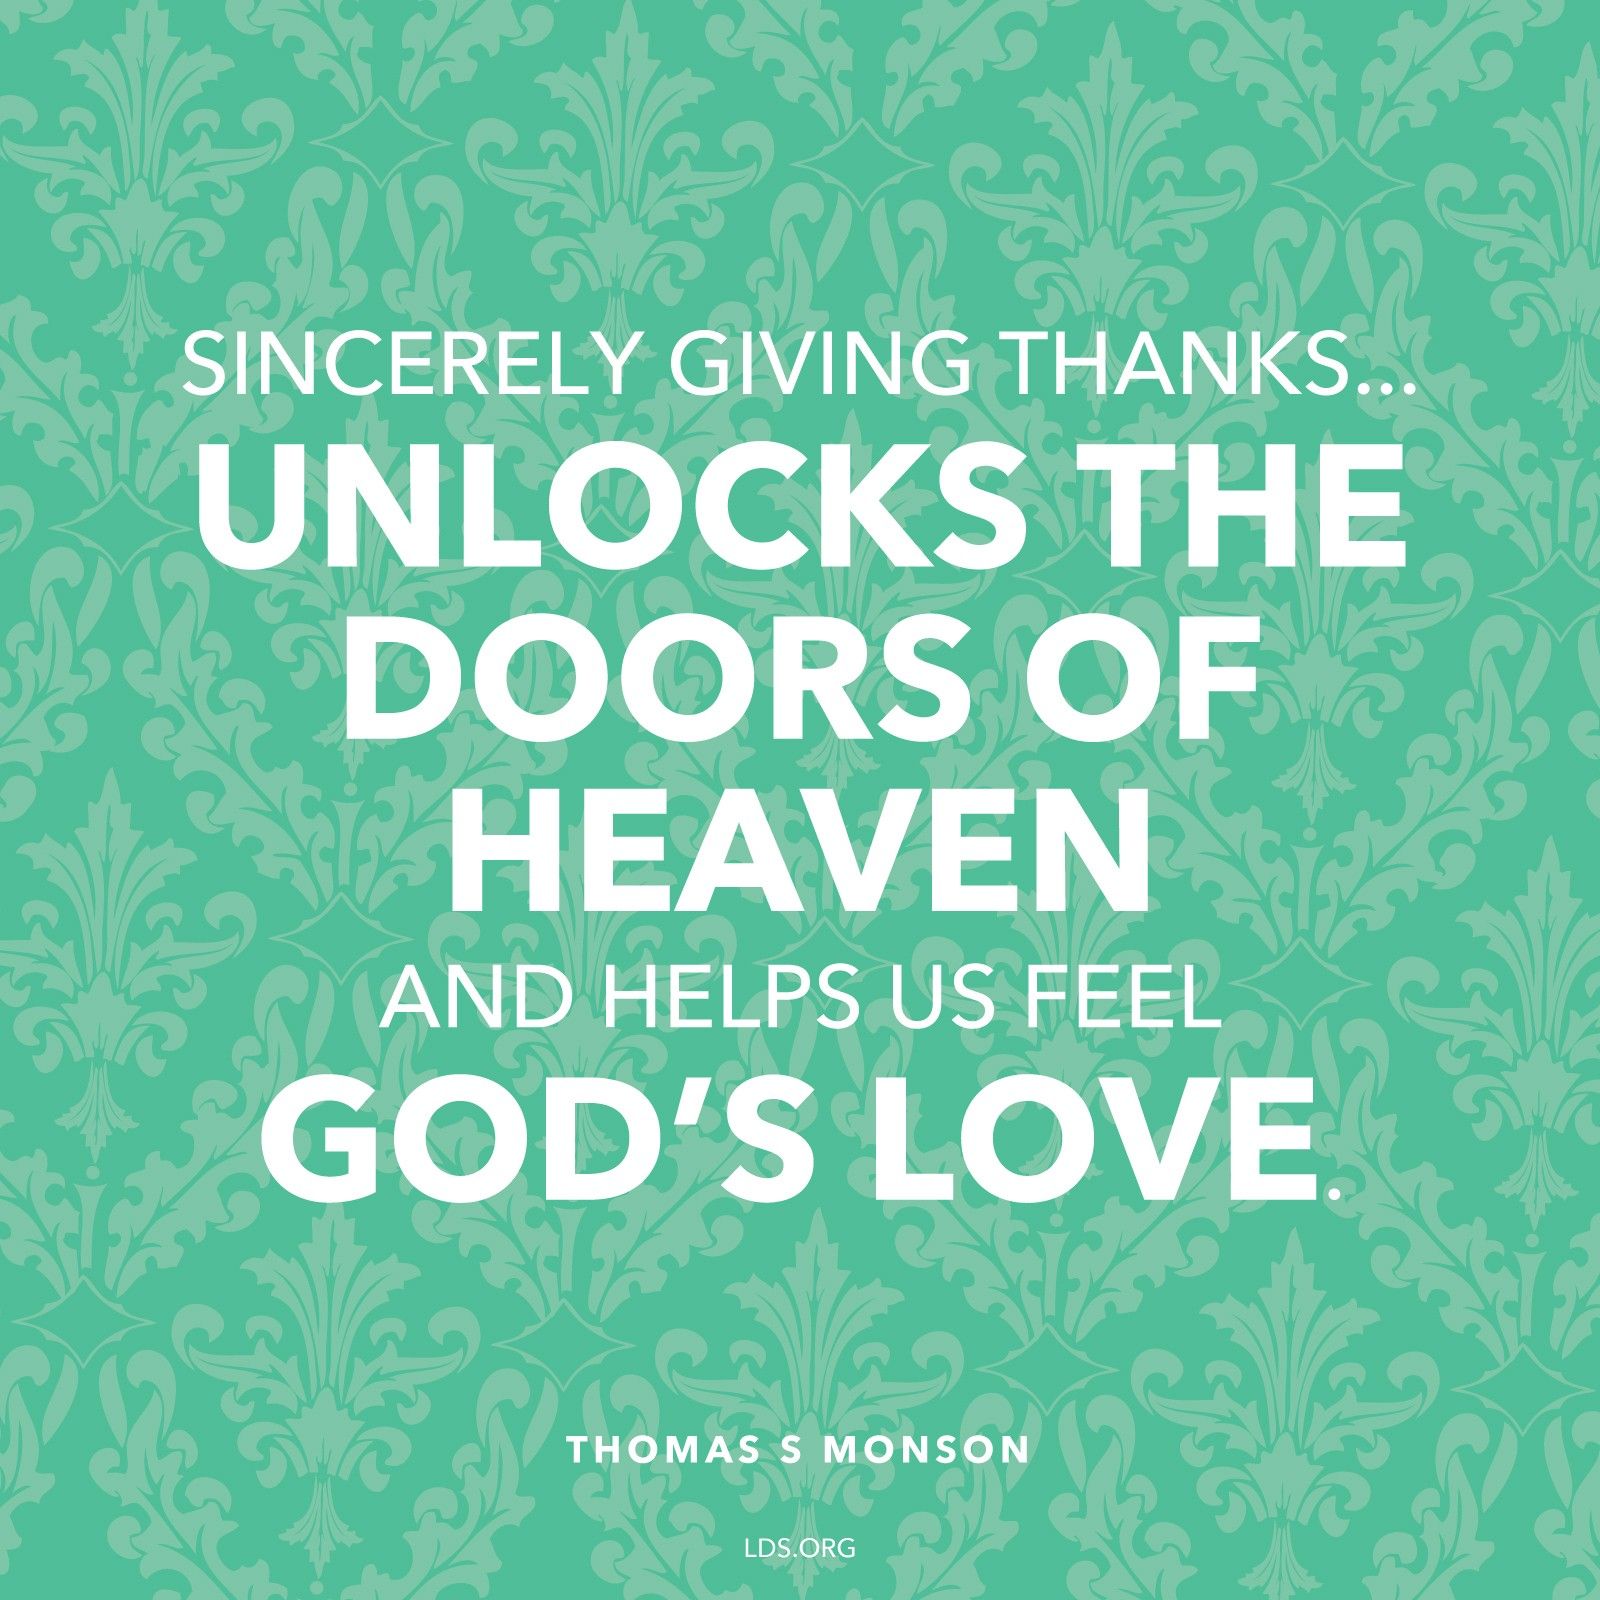 “Sincerely giving thanks … unlocks the doors of heaven and helps us feel God’s love.”—President Thomas S. Monson, “The Divine Gift of Gratitude”